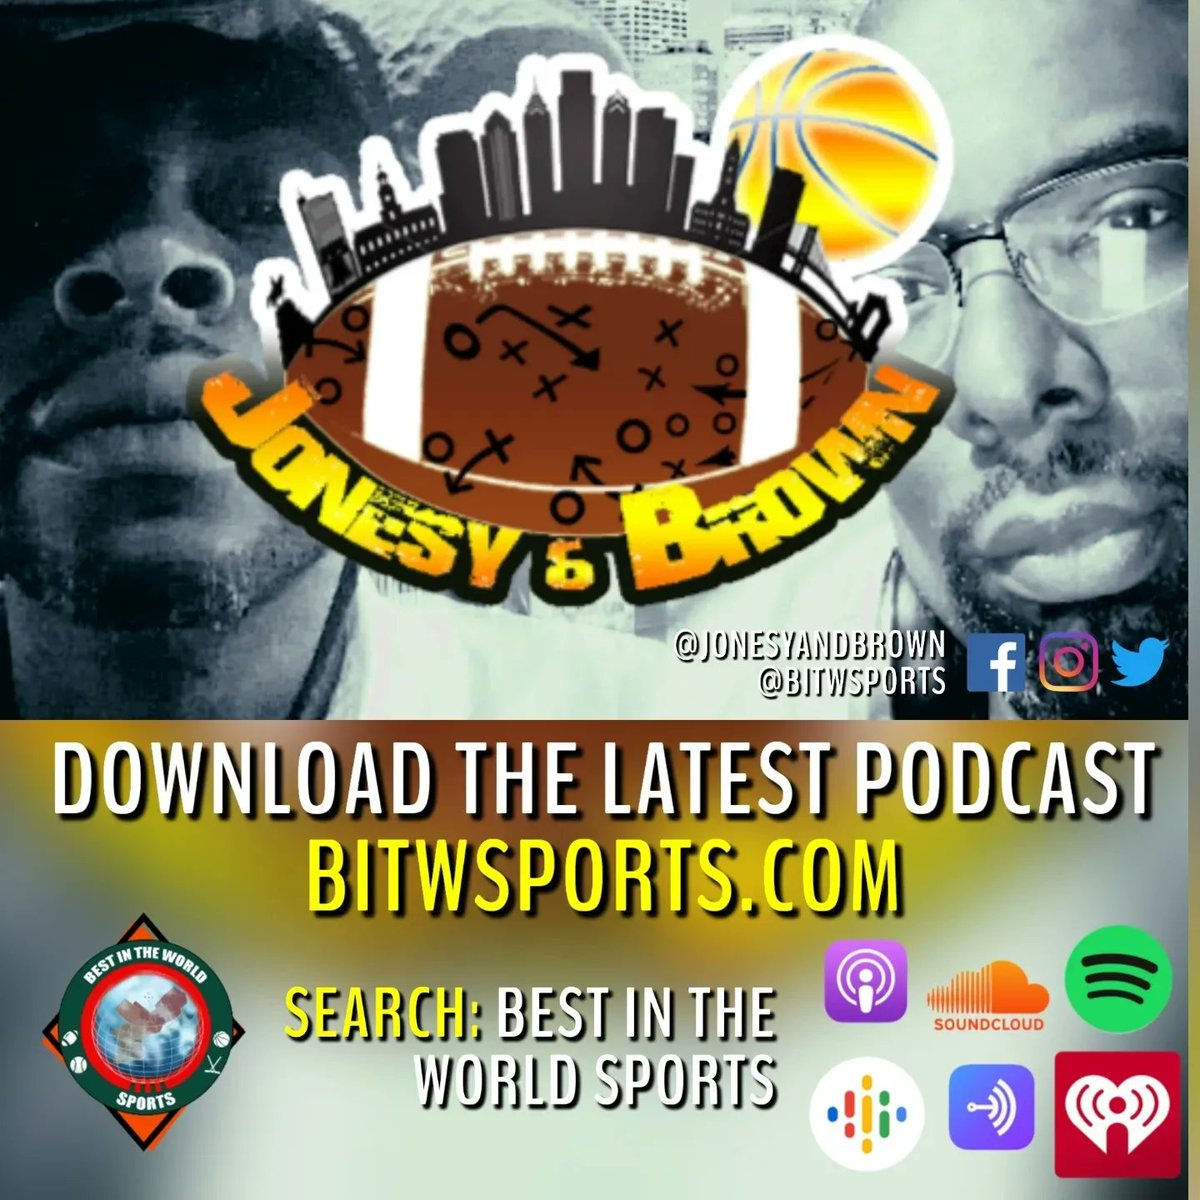 Check out @JonesyandBrown every weekend on @PhillyGoFlow This week, we're talking Eagles & Sixers with Roy Burton (@thebsline) Hosts: @jonesy_ljr, @jlbfromdvm Listen Live: PhillyGoFlow.com (Link in bio) Subscribe/Download: BITWsports.com Follow: @BITWsports